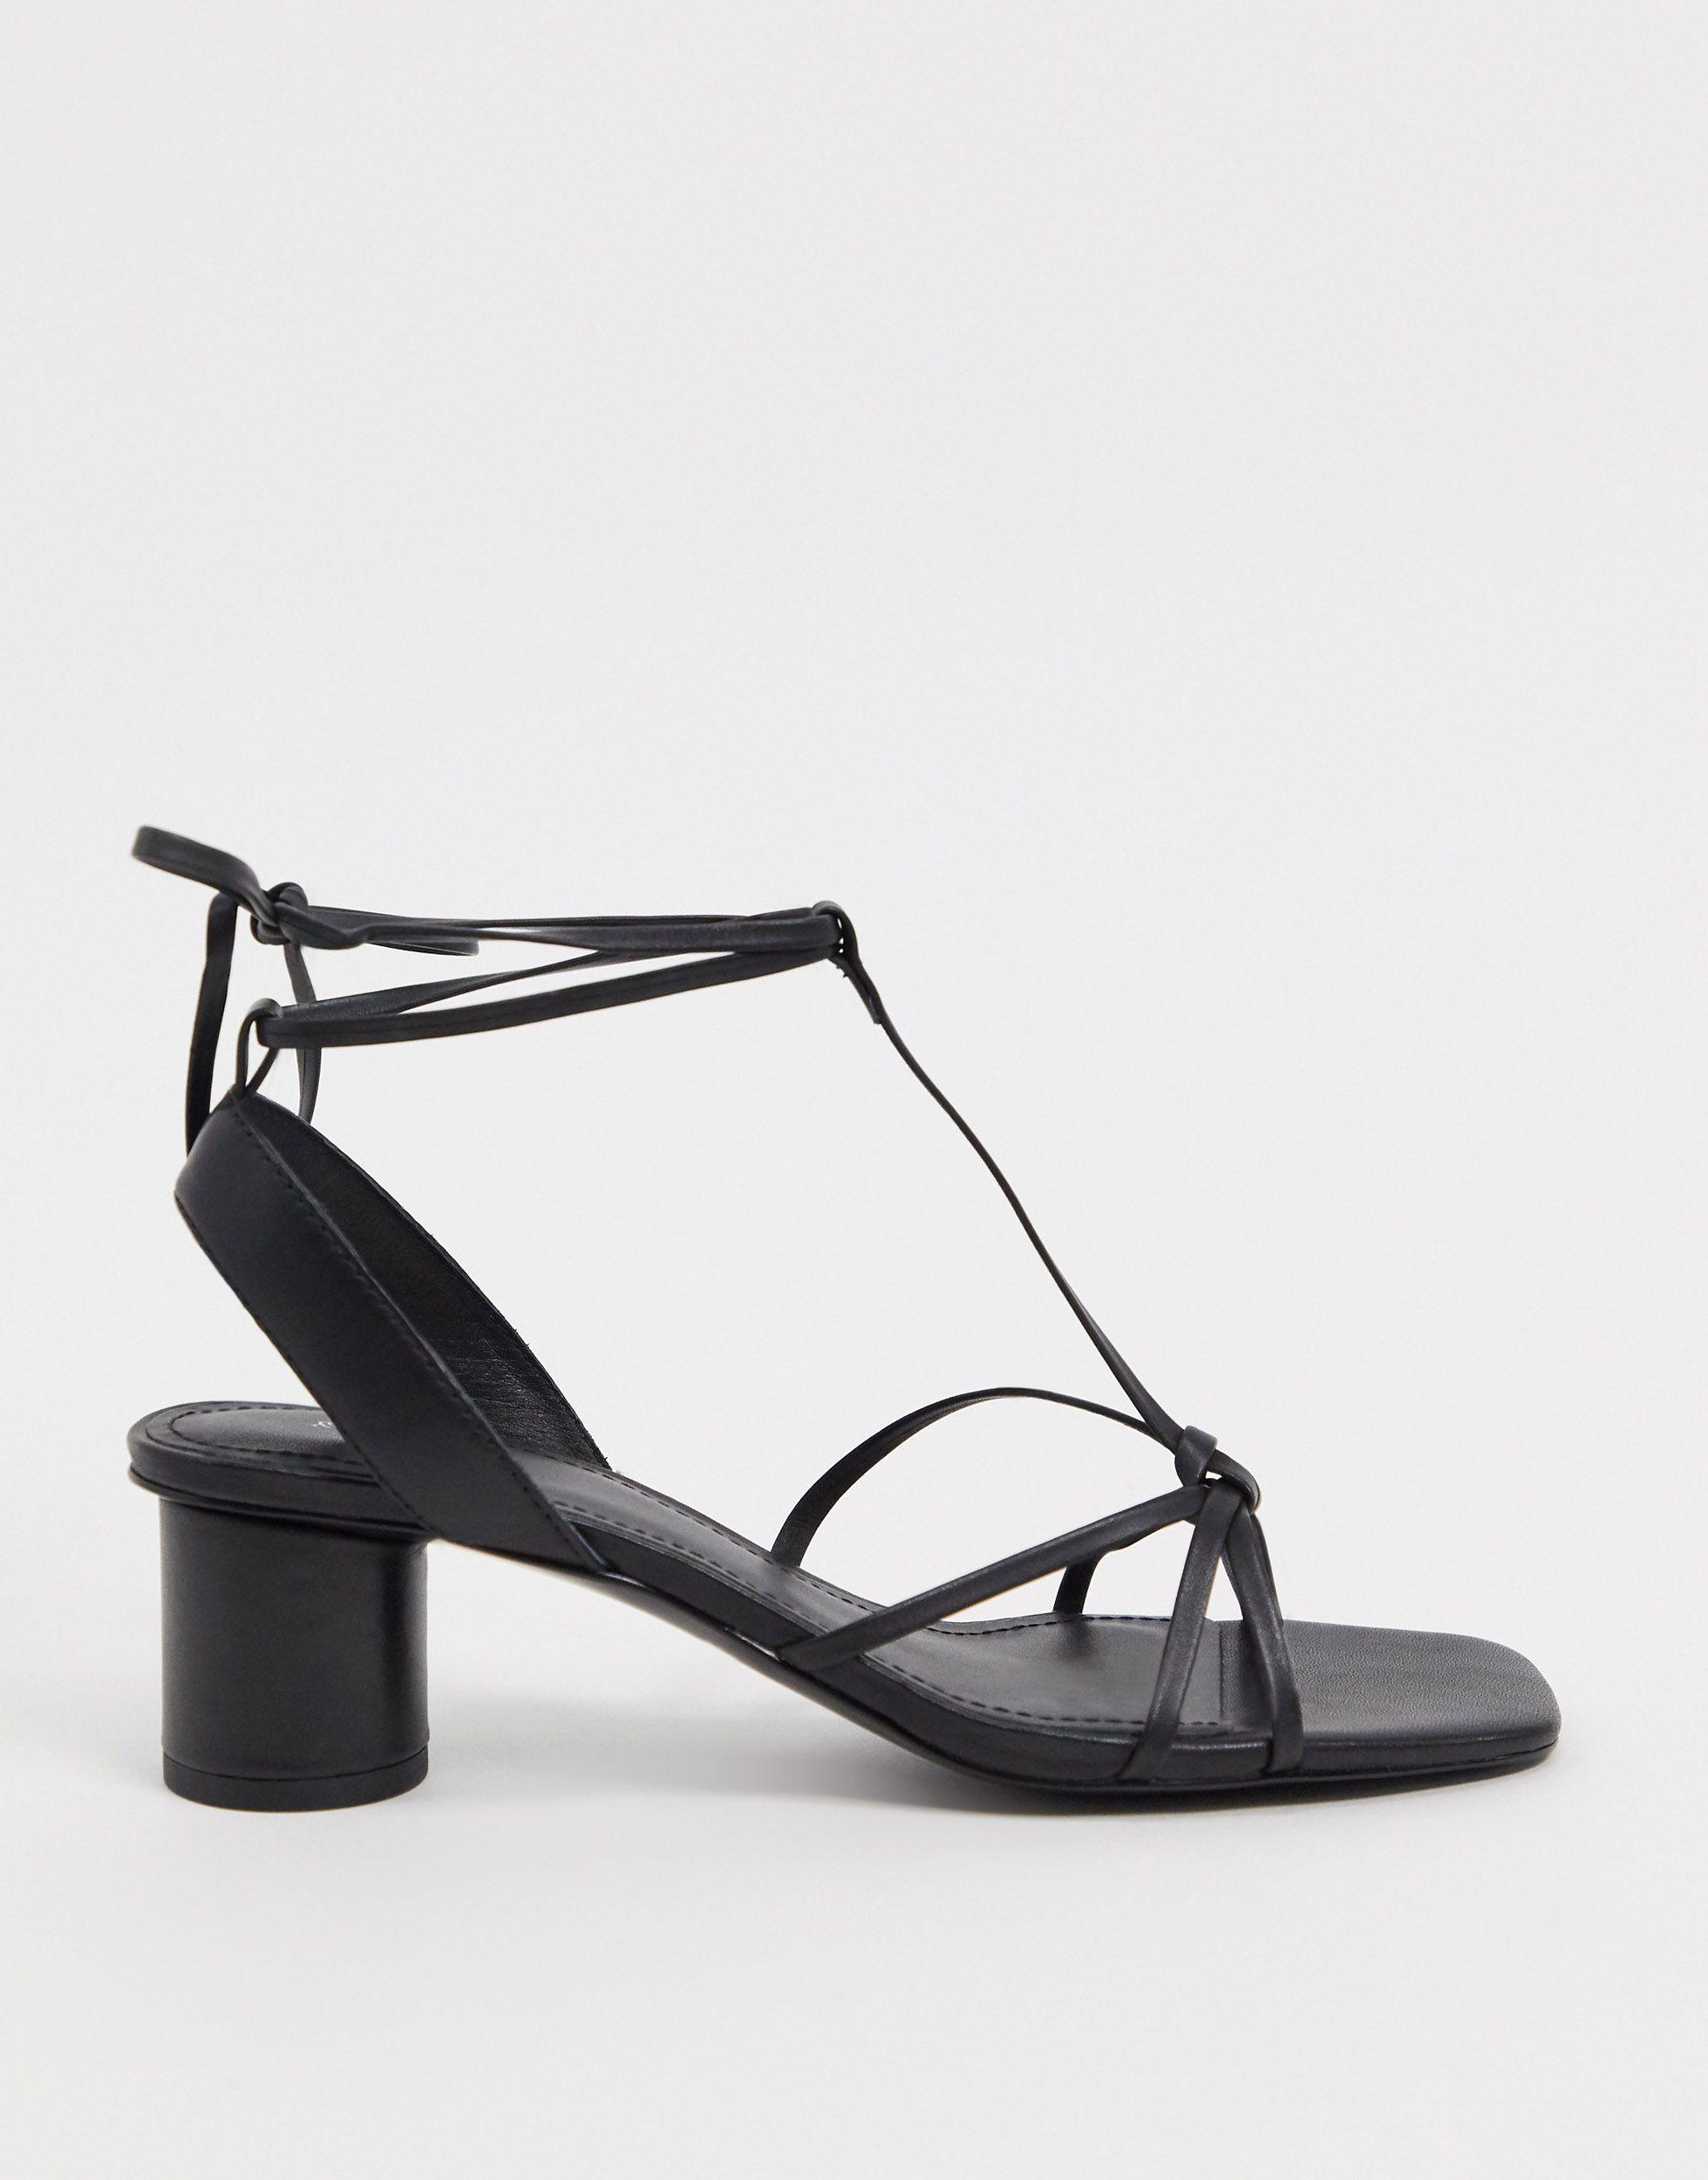 & Other Stories Square Toe Leather Strappy Heeled Sandals in Black | Lyst